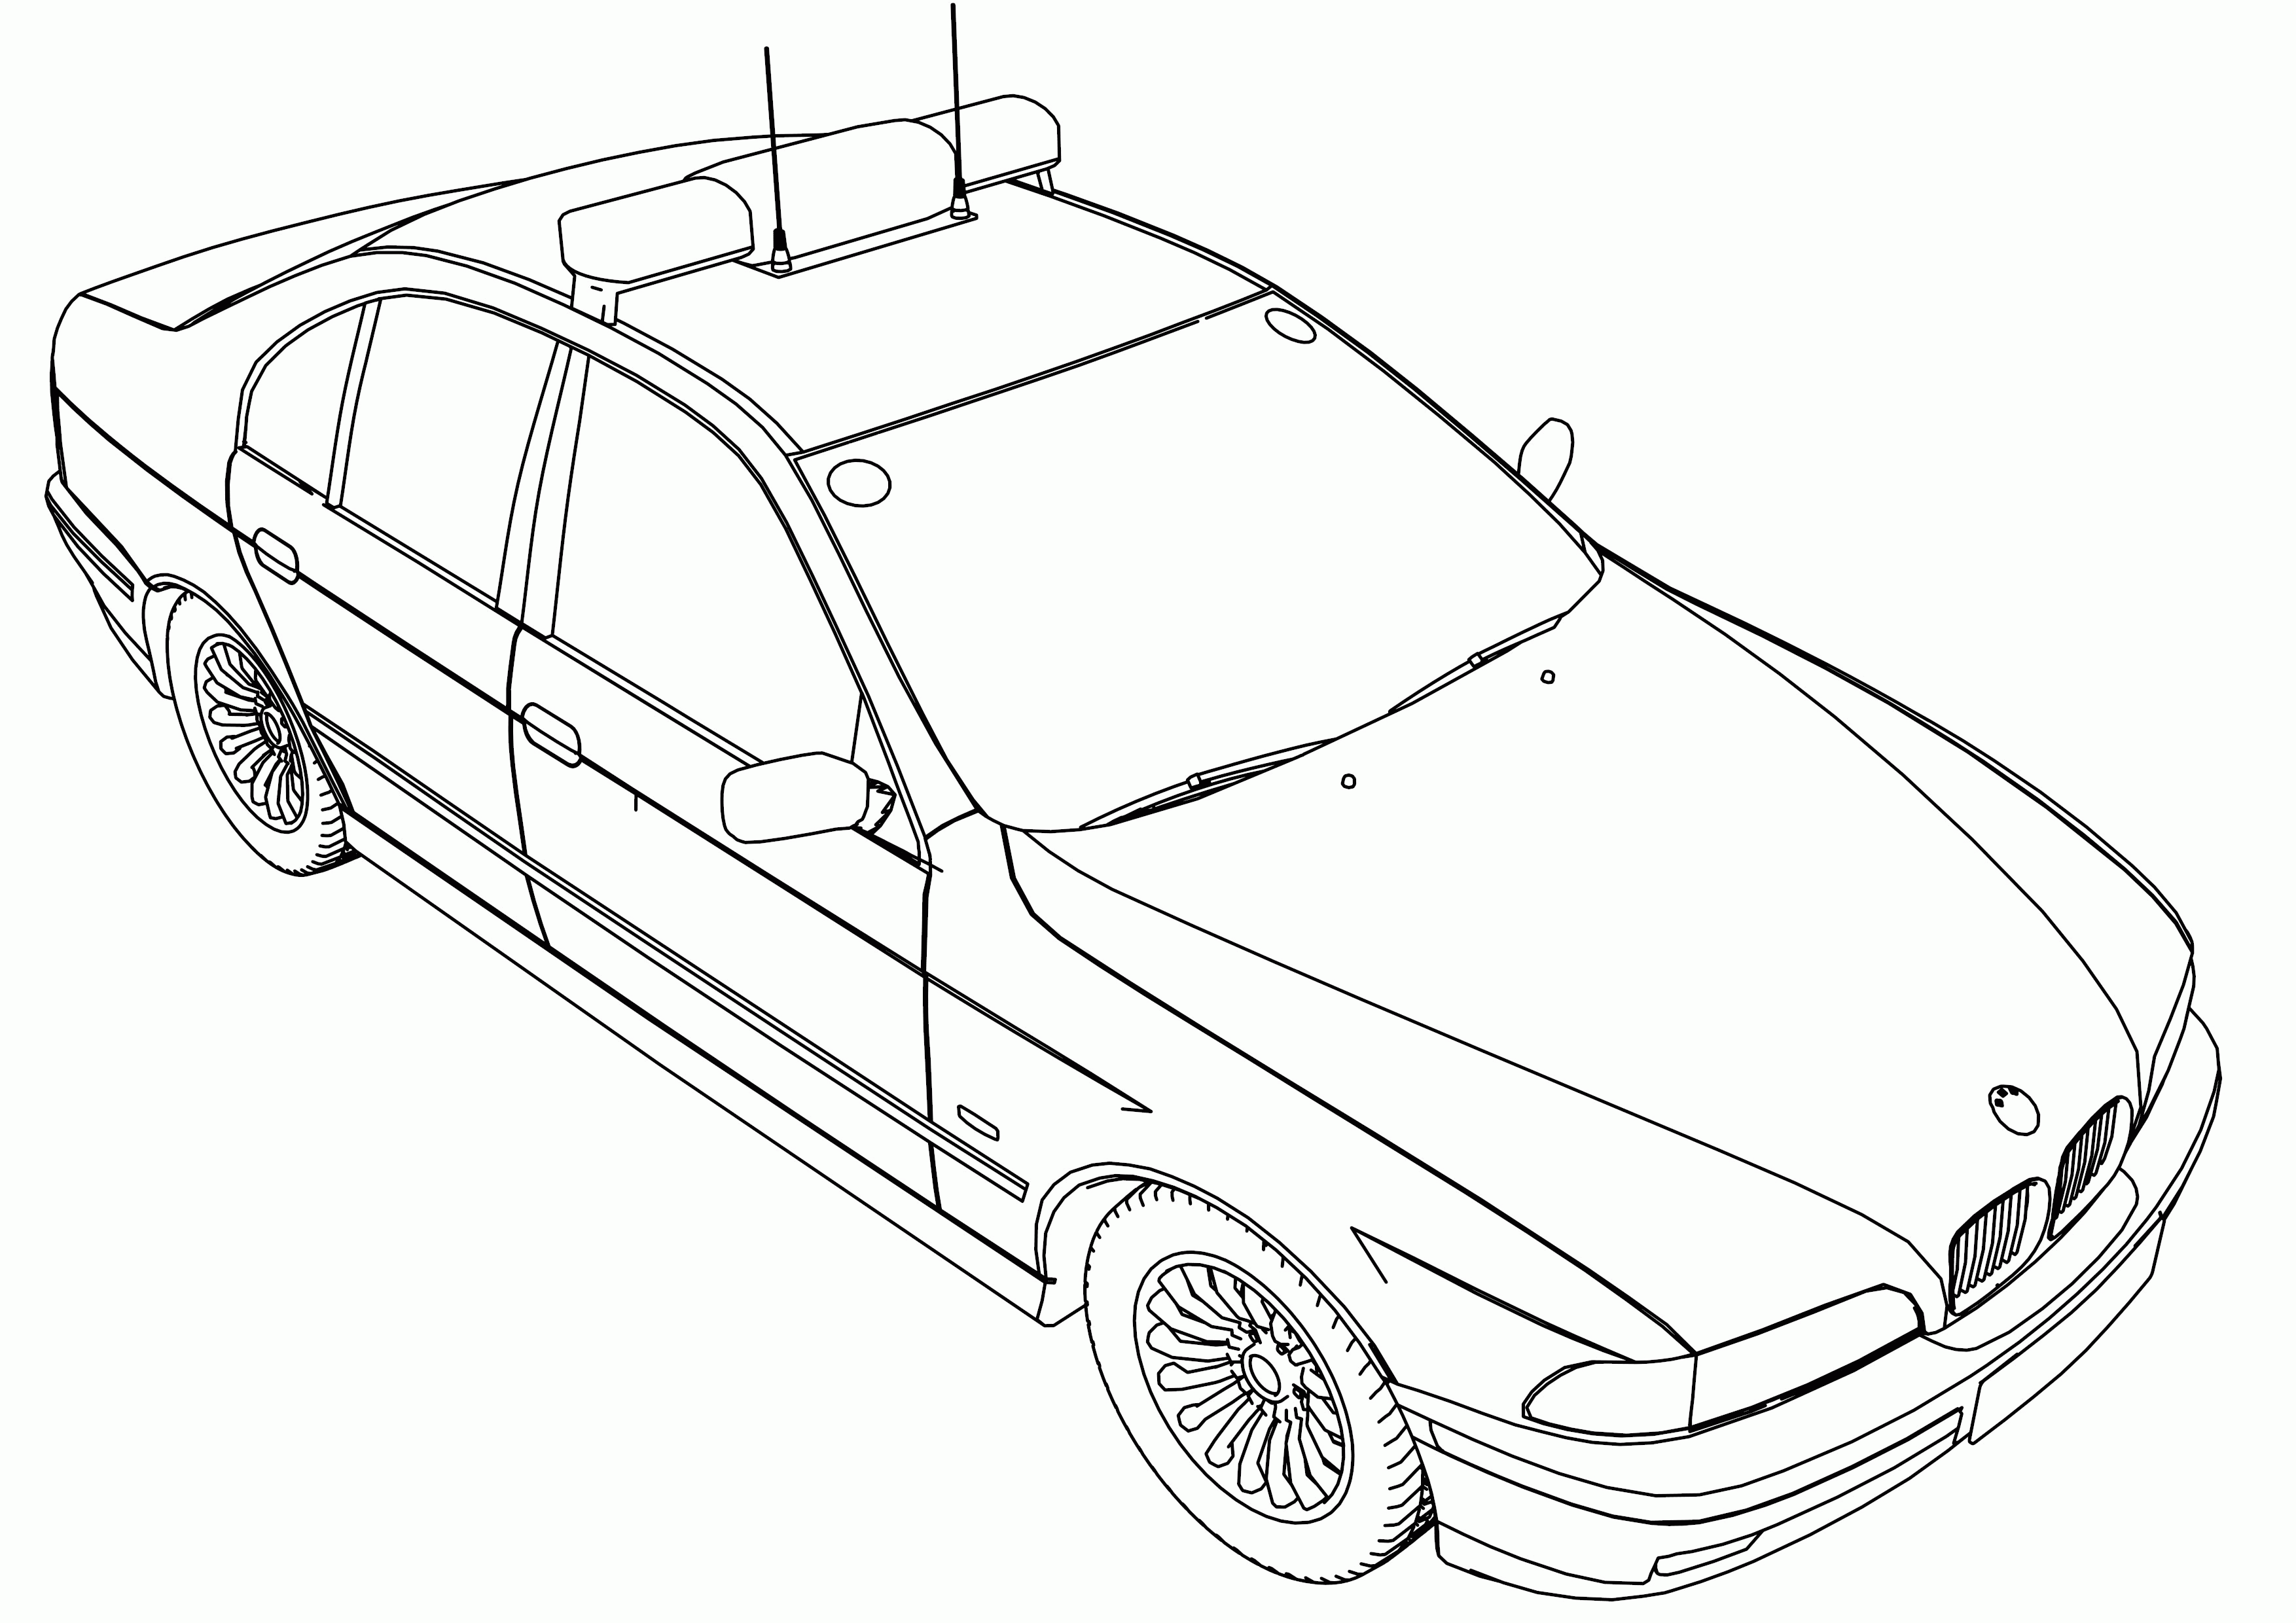 Bmw_5_police_car_coloring_page | Wecoloringpage